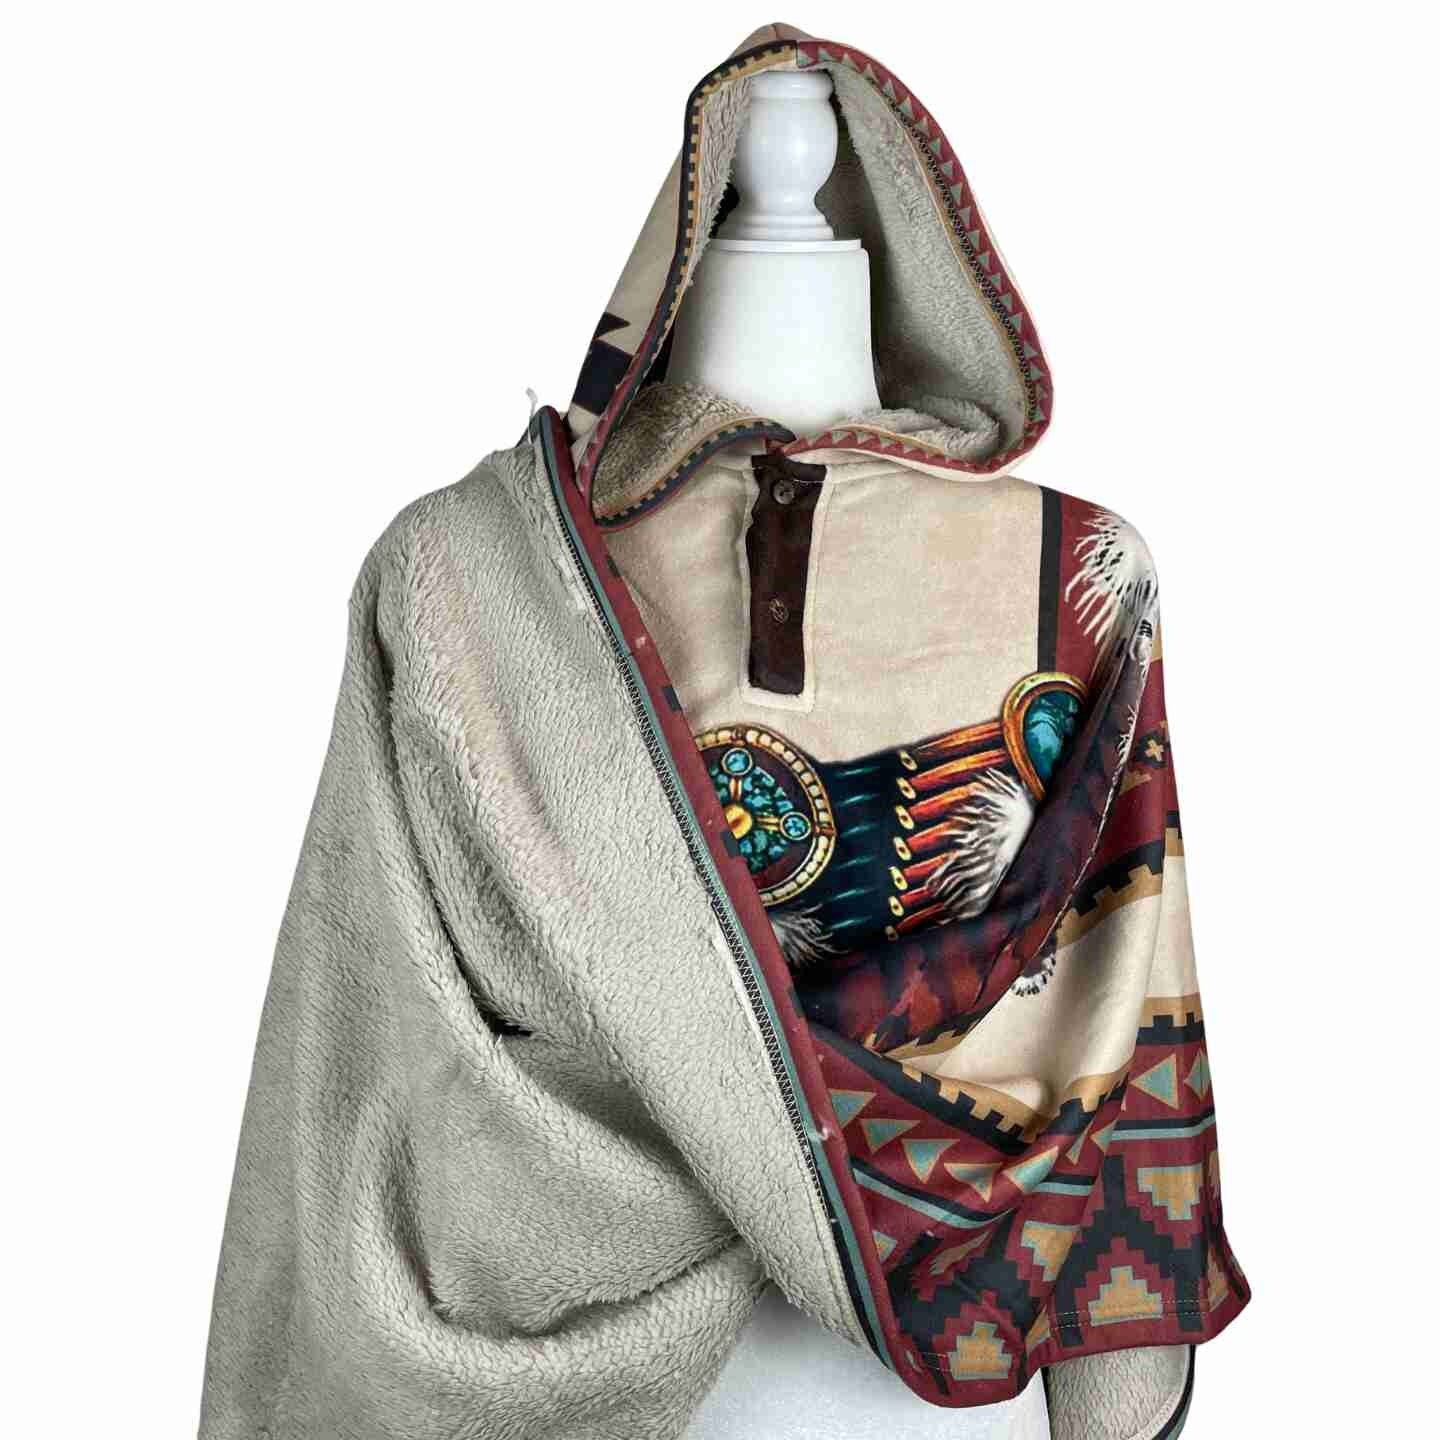 Unisex Sherpa Hooded Poncho - Feathers Tan Black